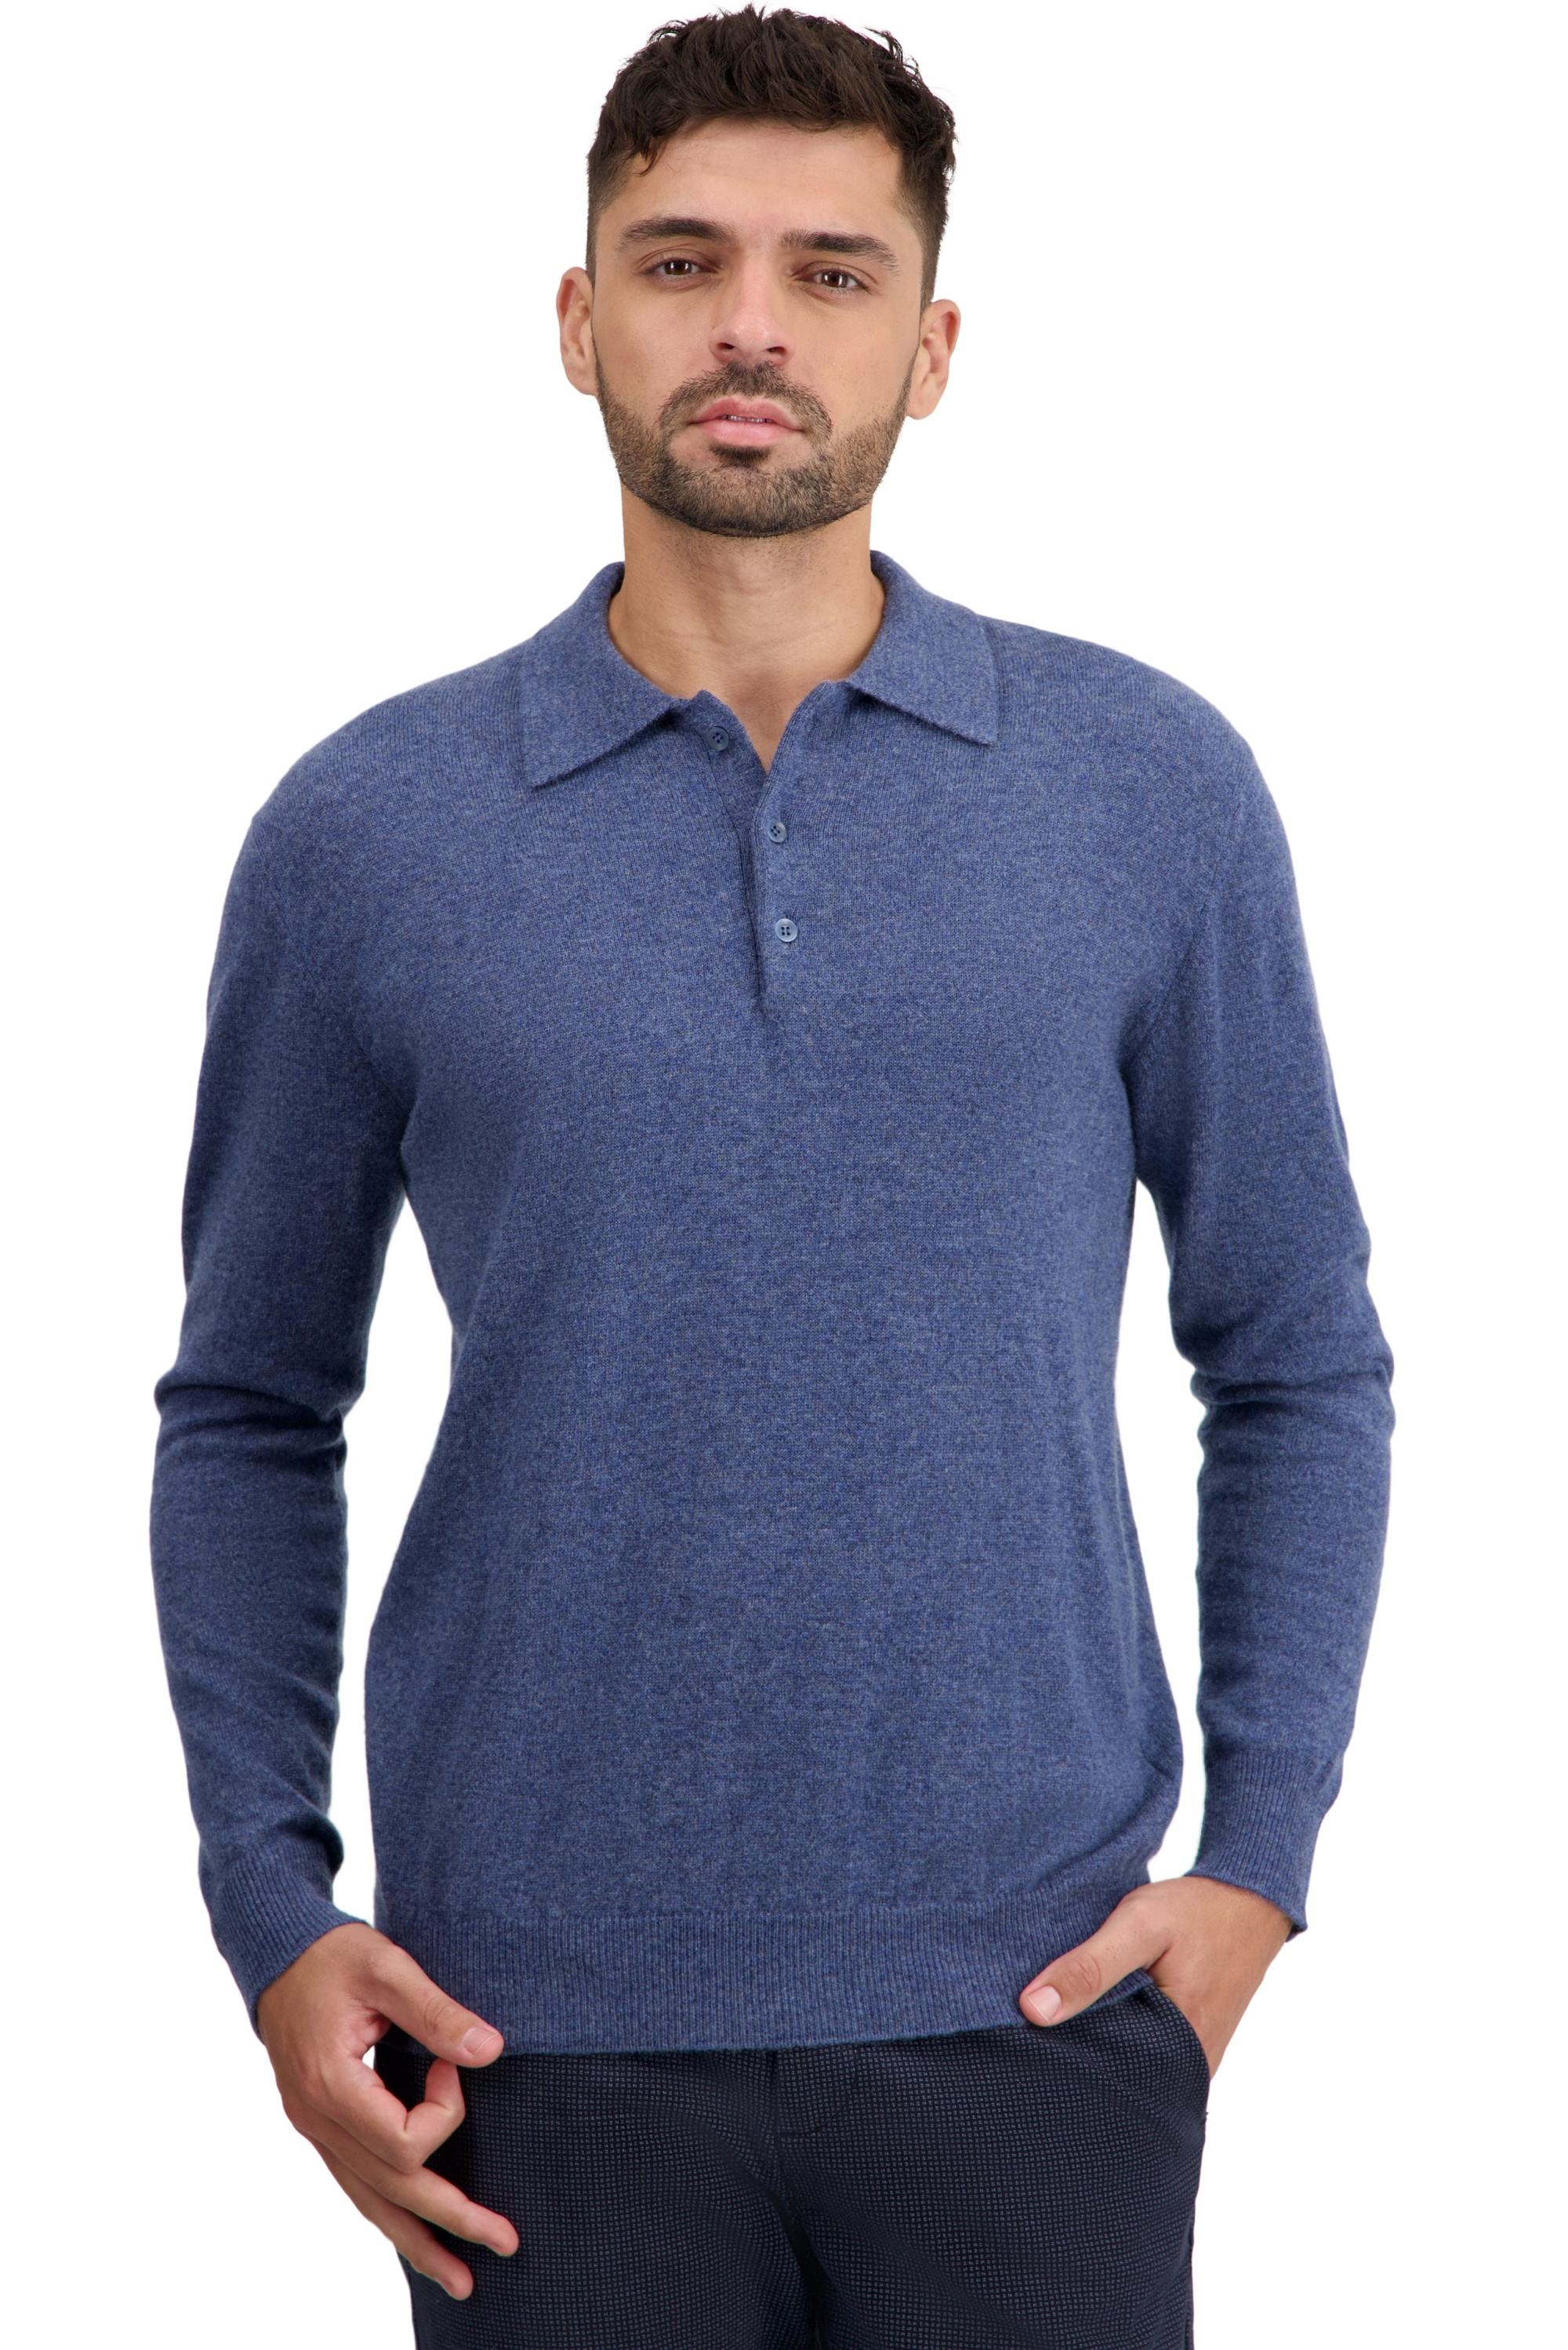 Cachemire polo camionneur homme tarn first nordic blue 3xl